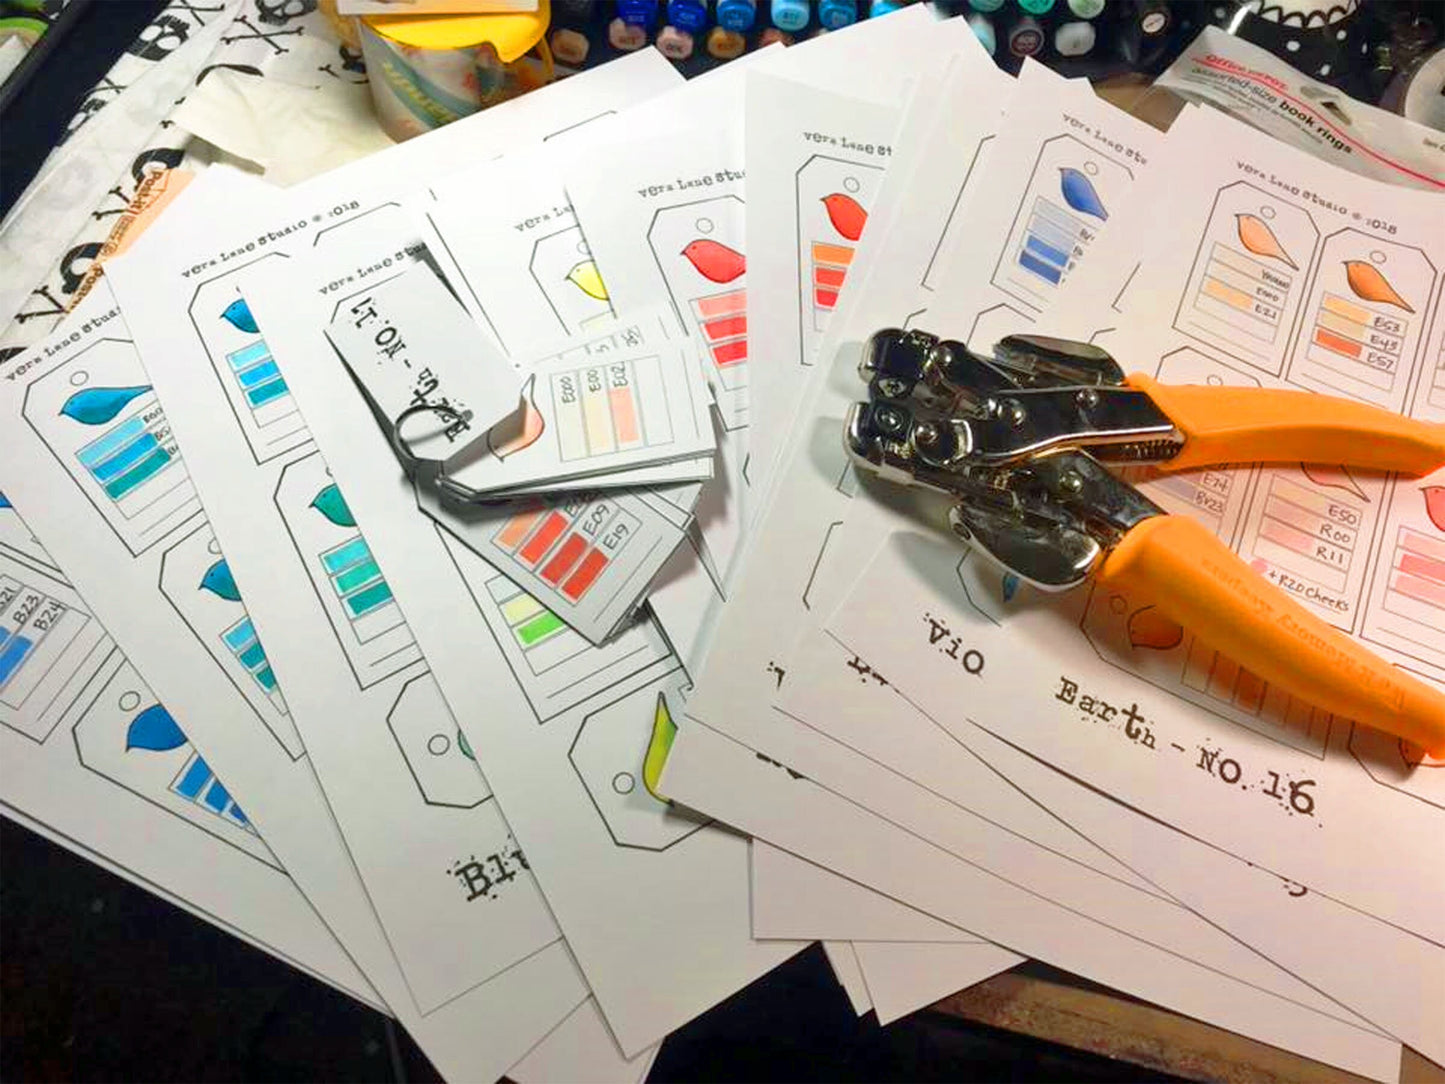 Color Tags - 170 Copic color blends on easy to read tags - digital download